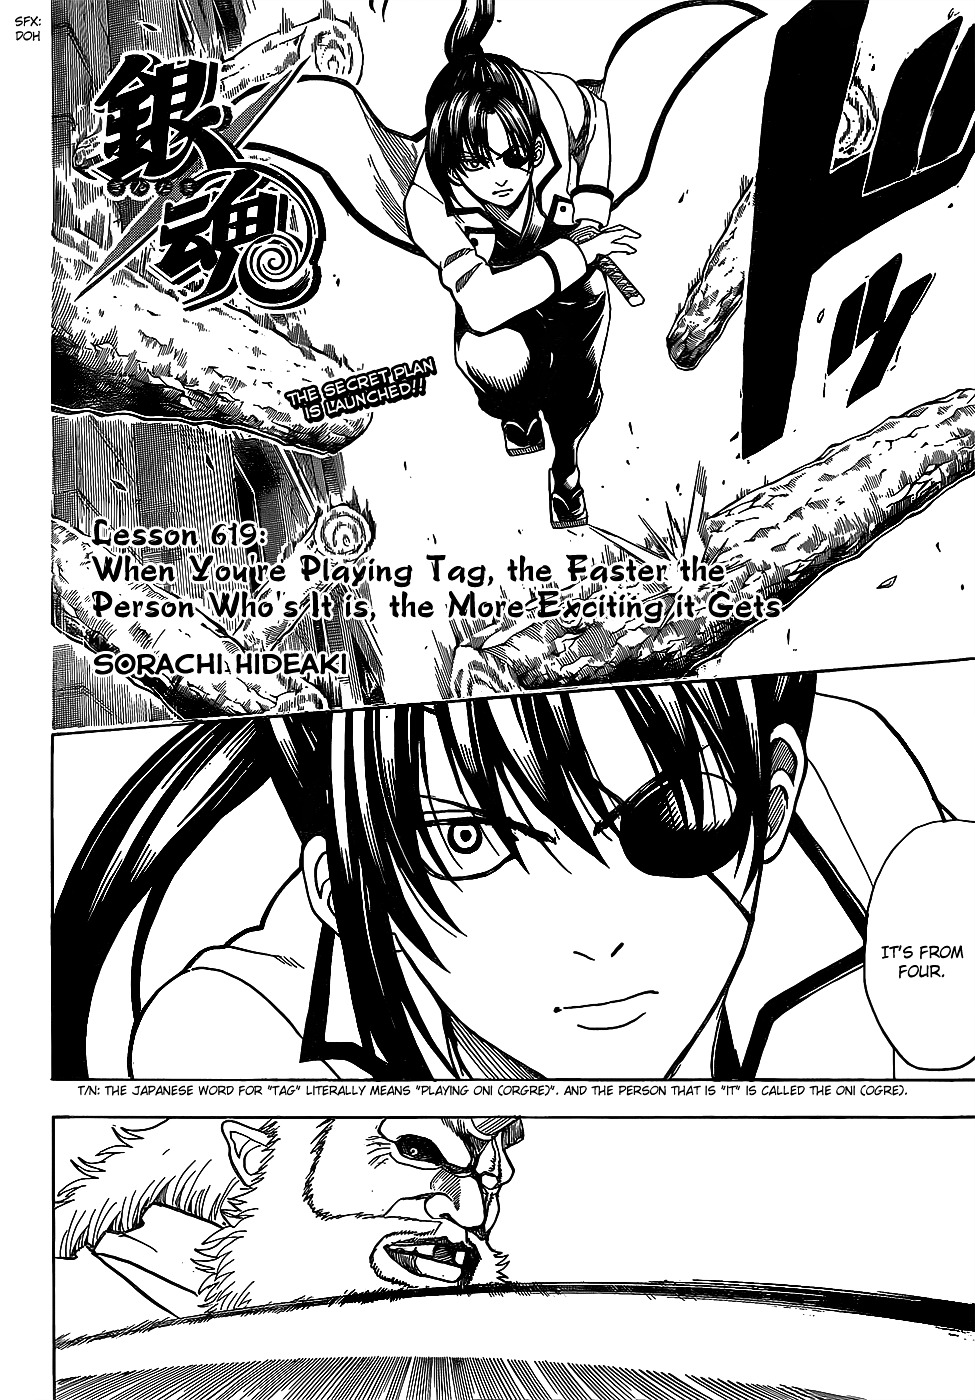 Gintama Vol.69 Chapter 619 V2 : When You Re Playing Tag, The Faster The Person Who S It Is, The More... - Picture 2